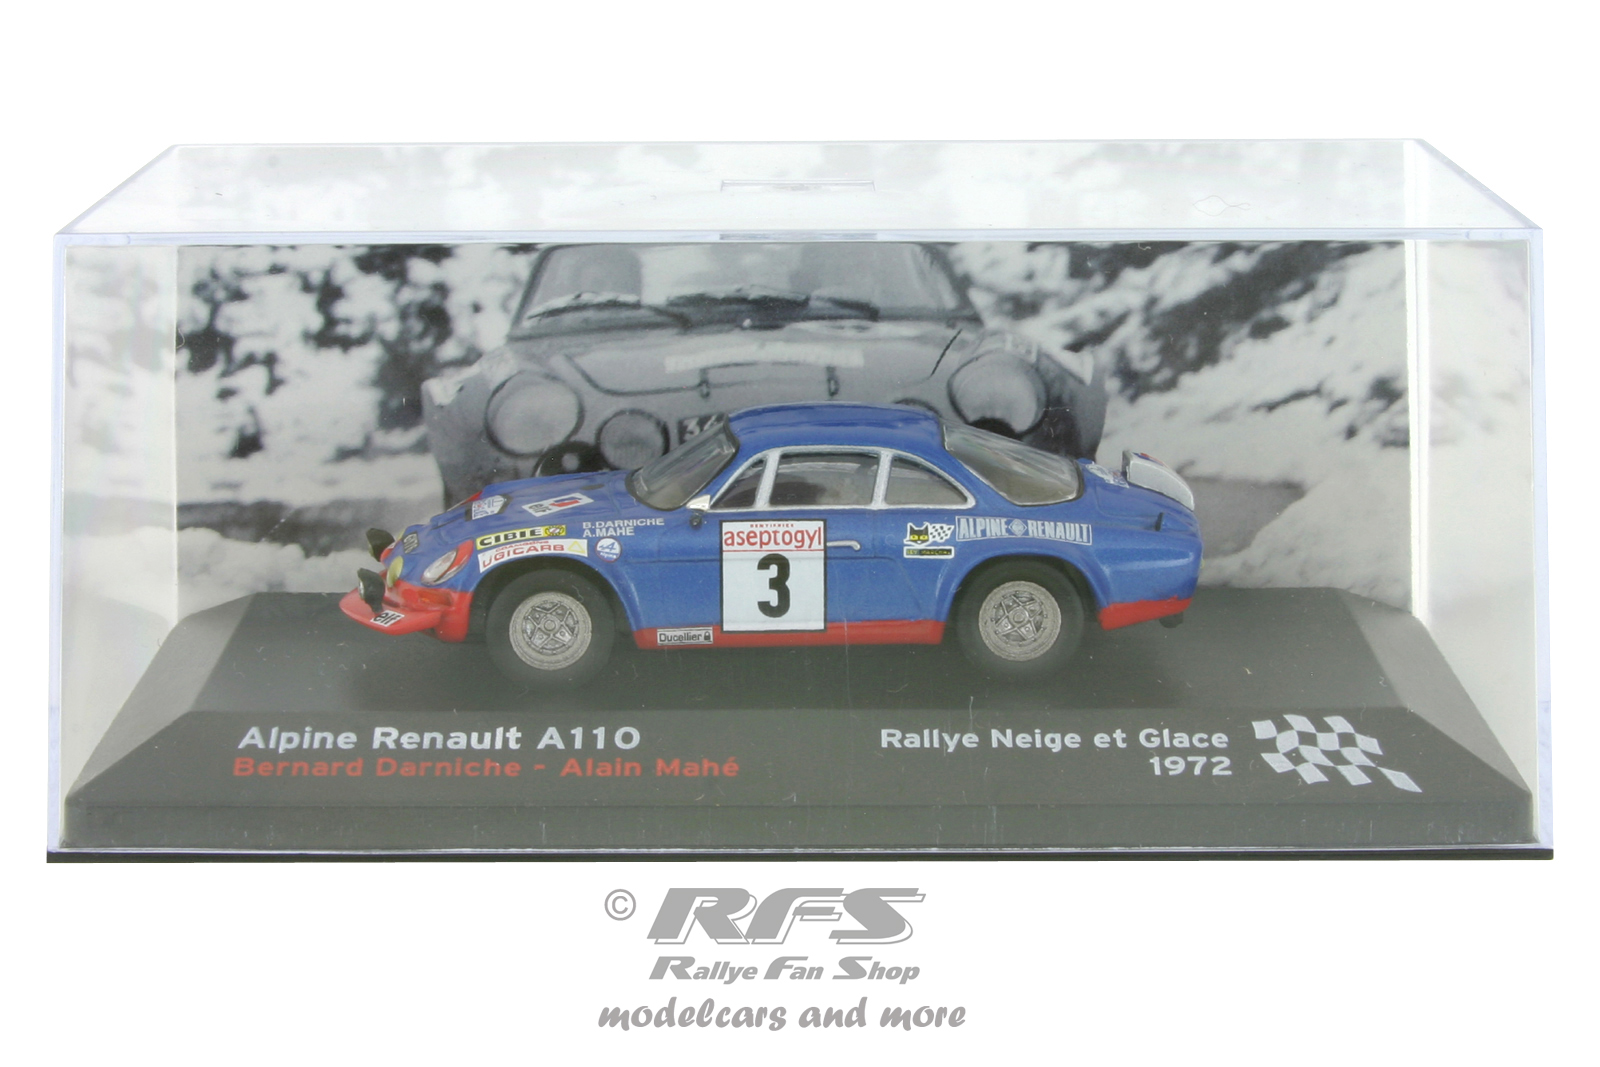 Alpine Renault A110 1800 - Rally Neige et Glace 1972